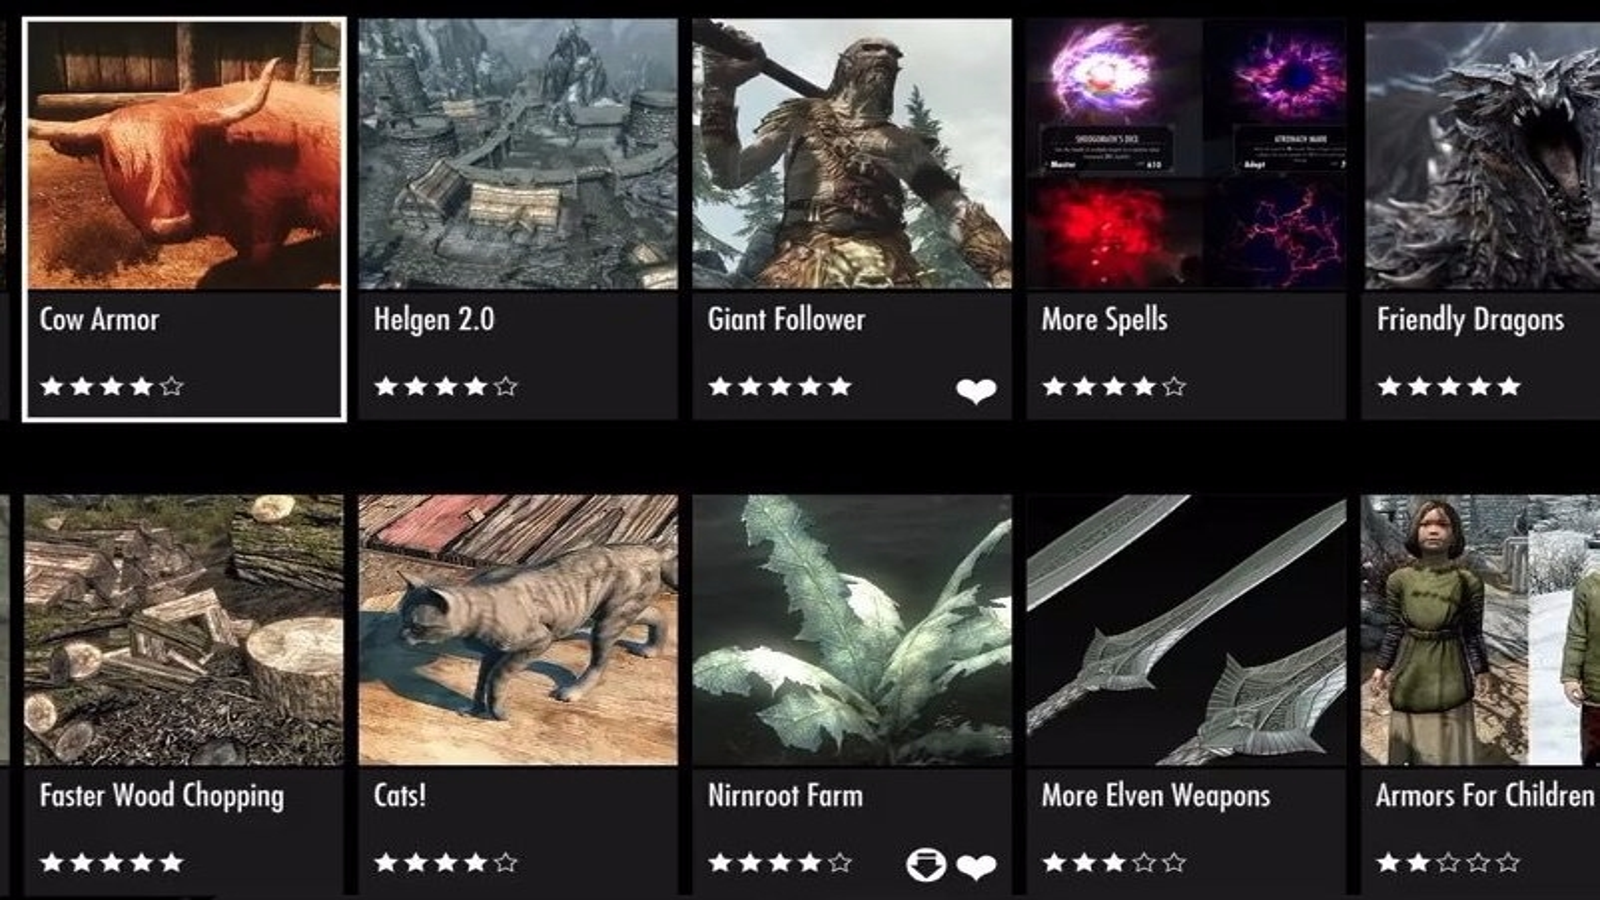 Skyrim mods on PS4, Xbox One, PC - How to install mods in the